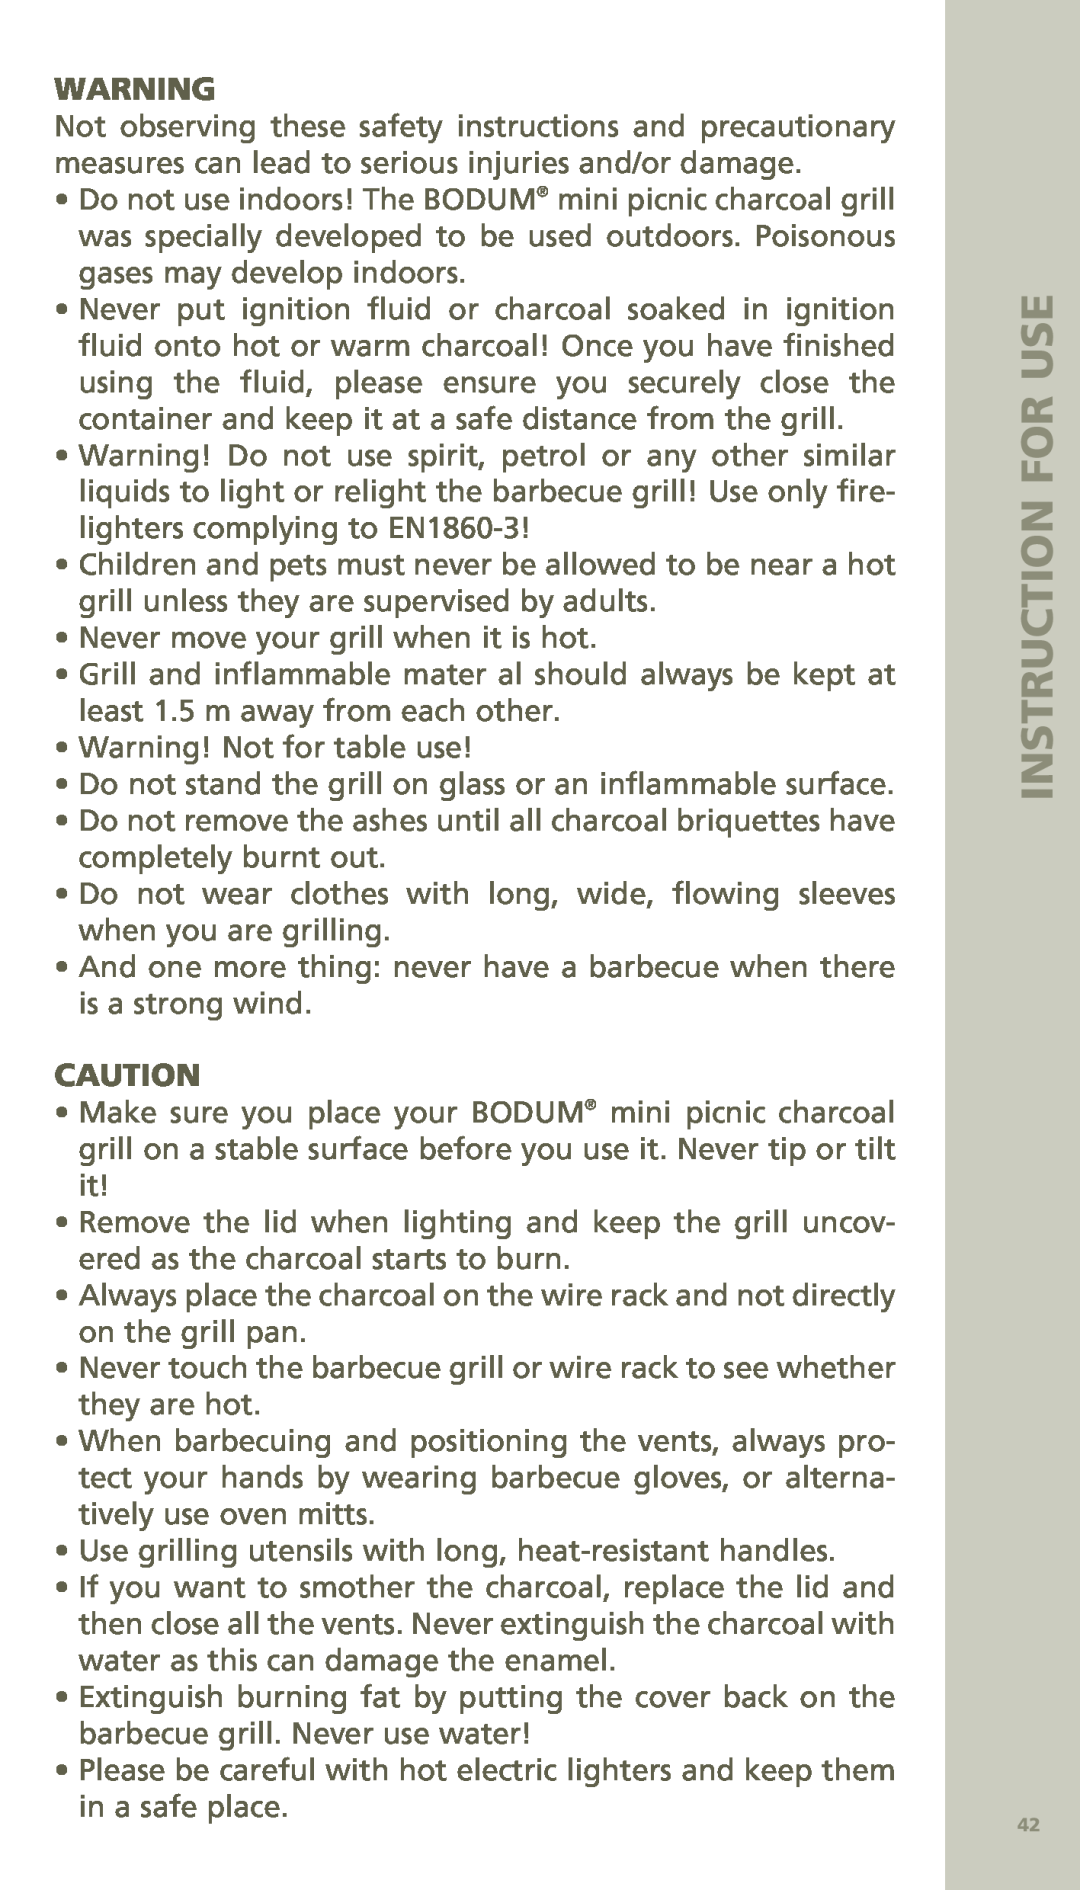 Bodum 11421 manual Instruction for use, Never move your grill when it is hot 